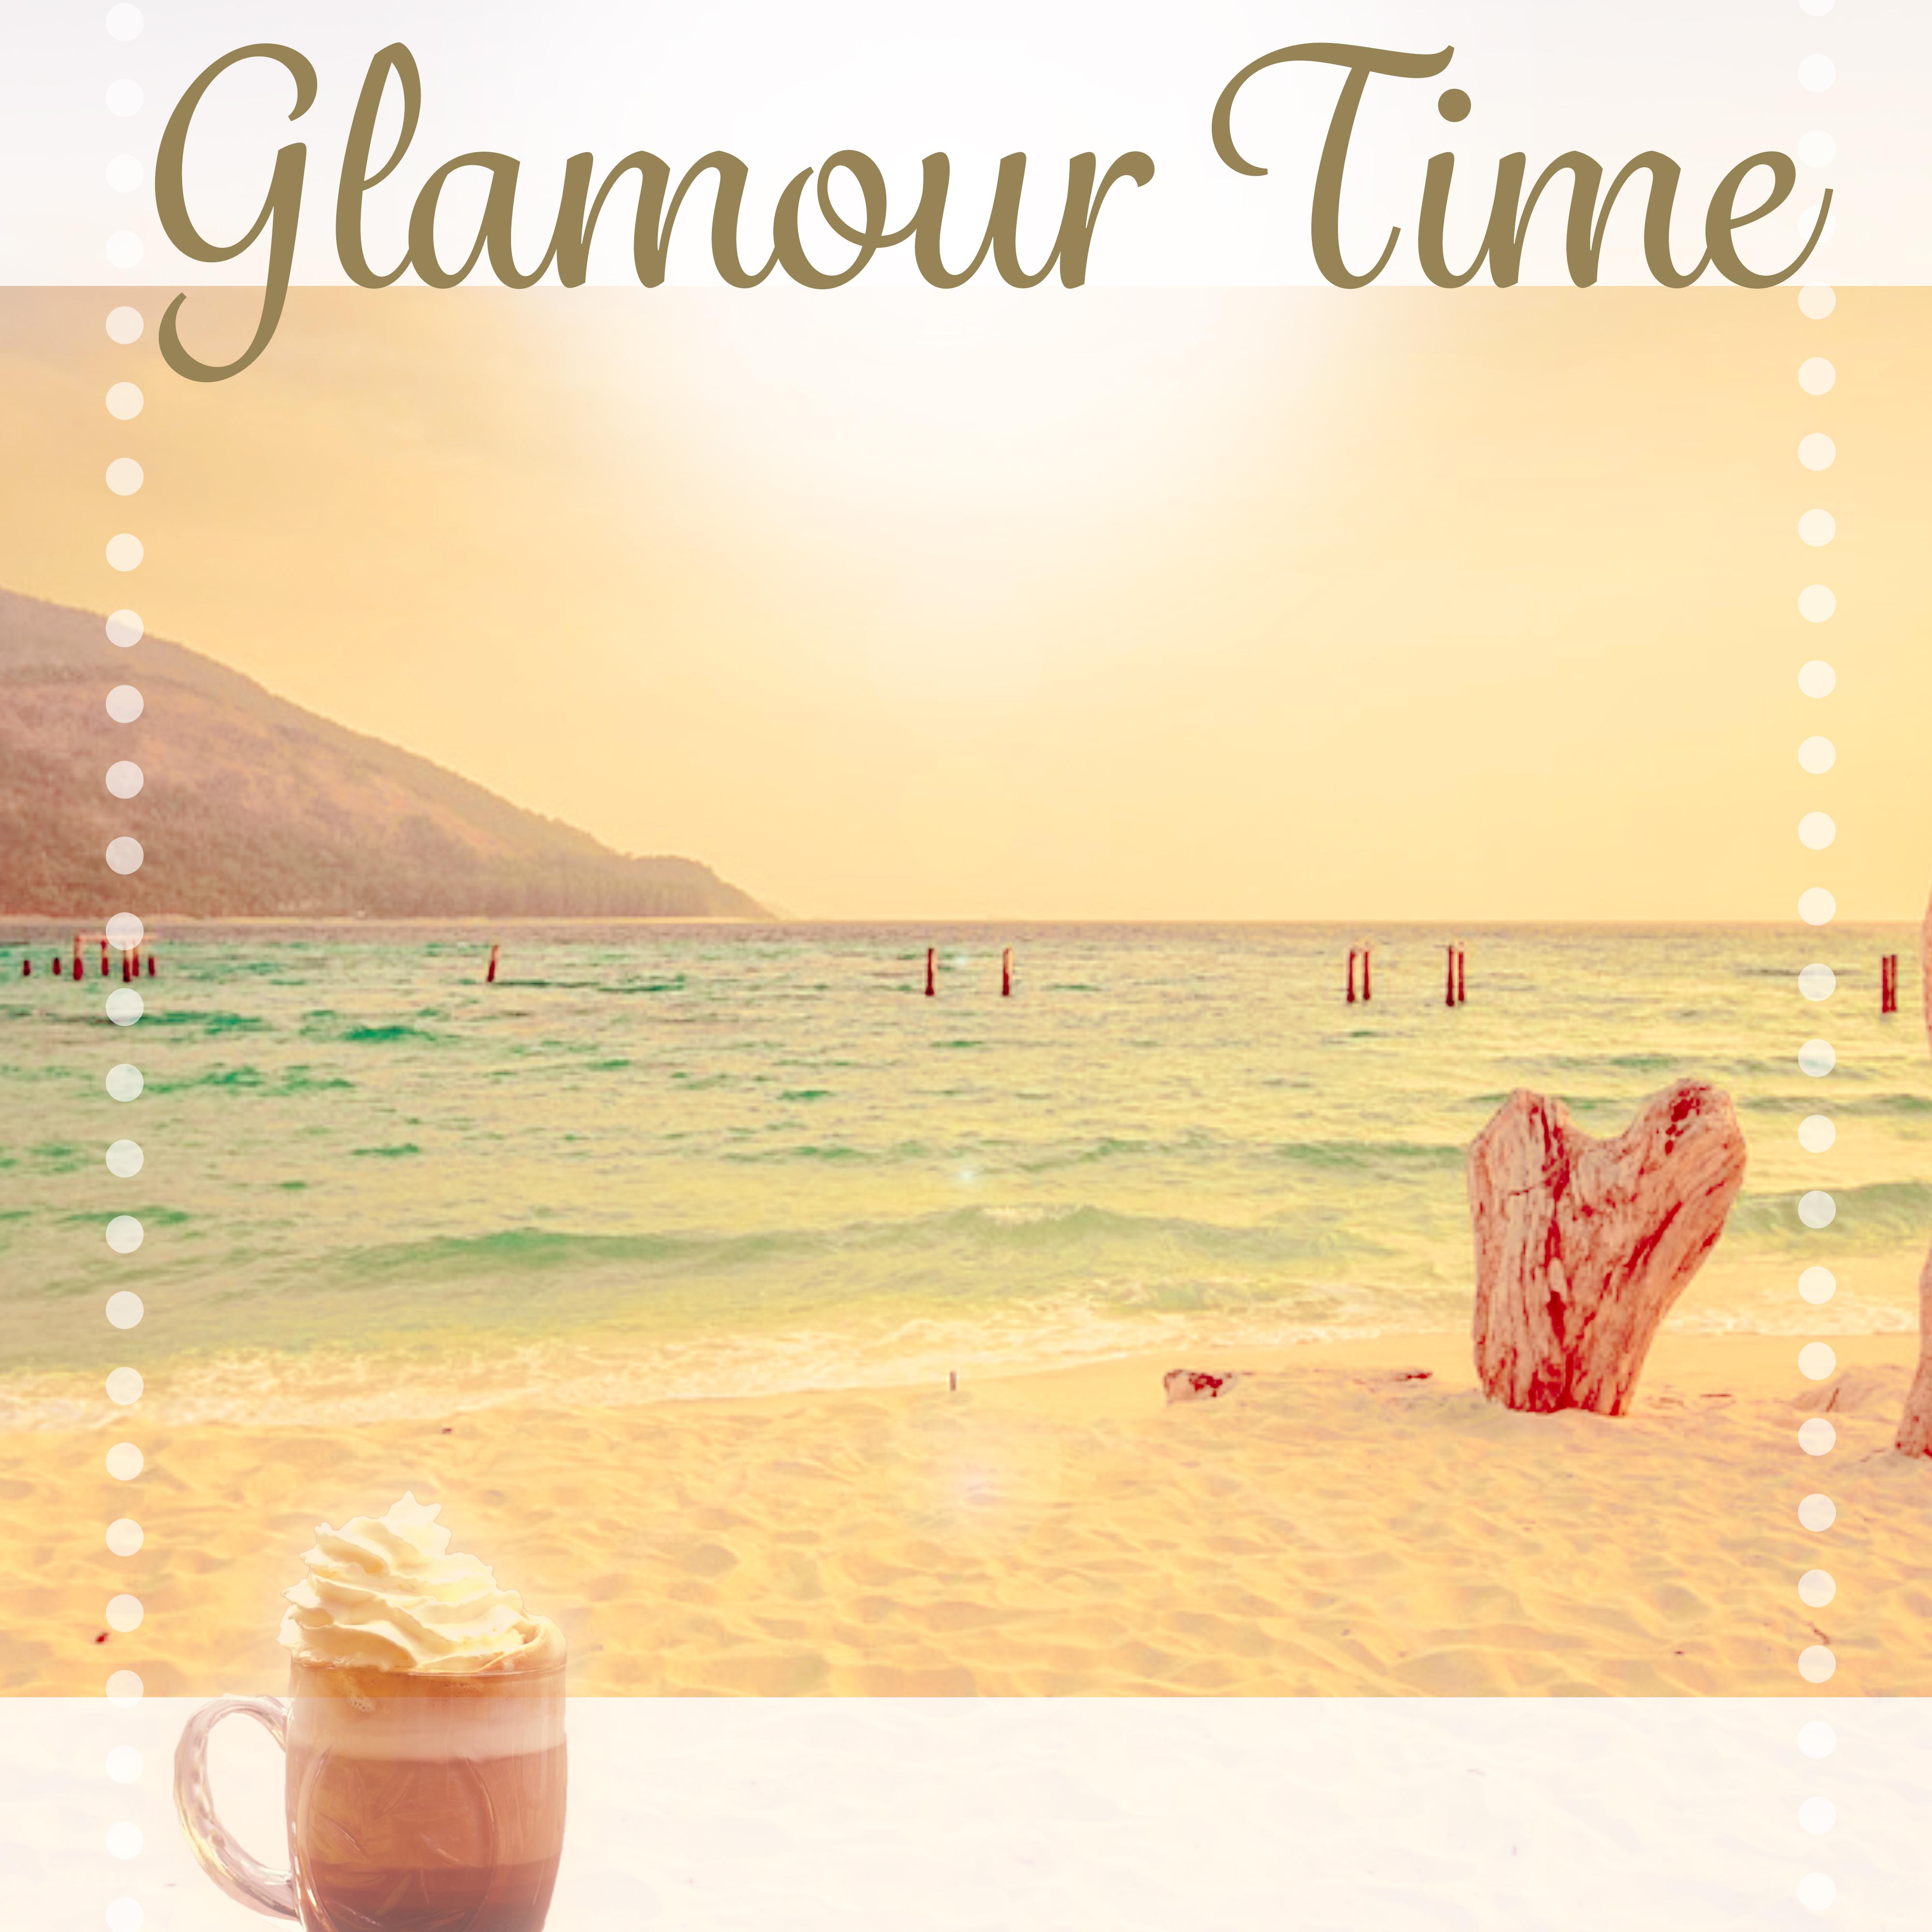 Glamour Time  Chill Tone, Lounge Ambient, Chill Out Music, Beach Music, Let Go, Relaxation, Glamour Time Music